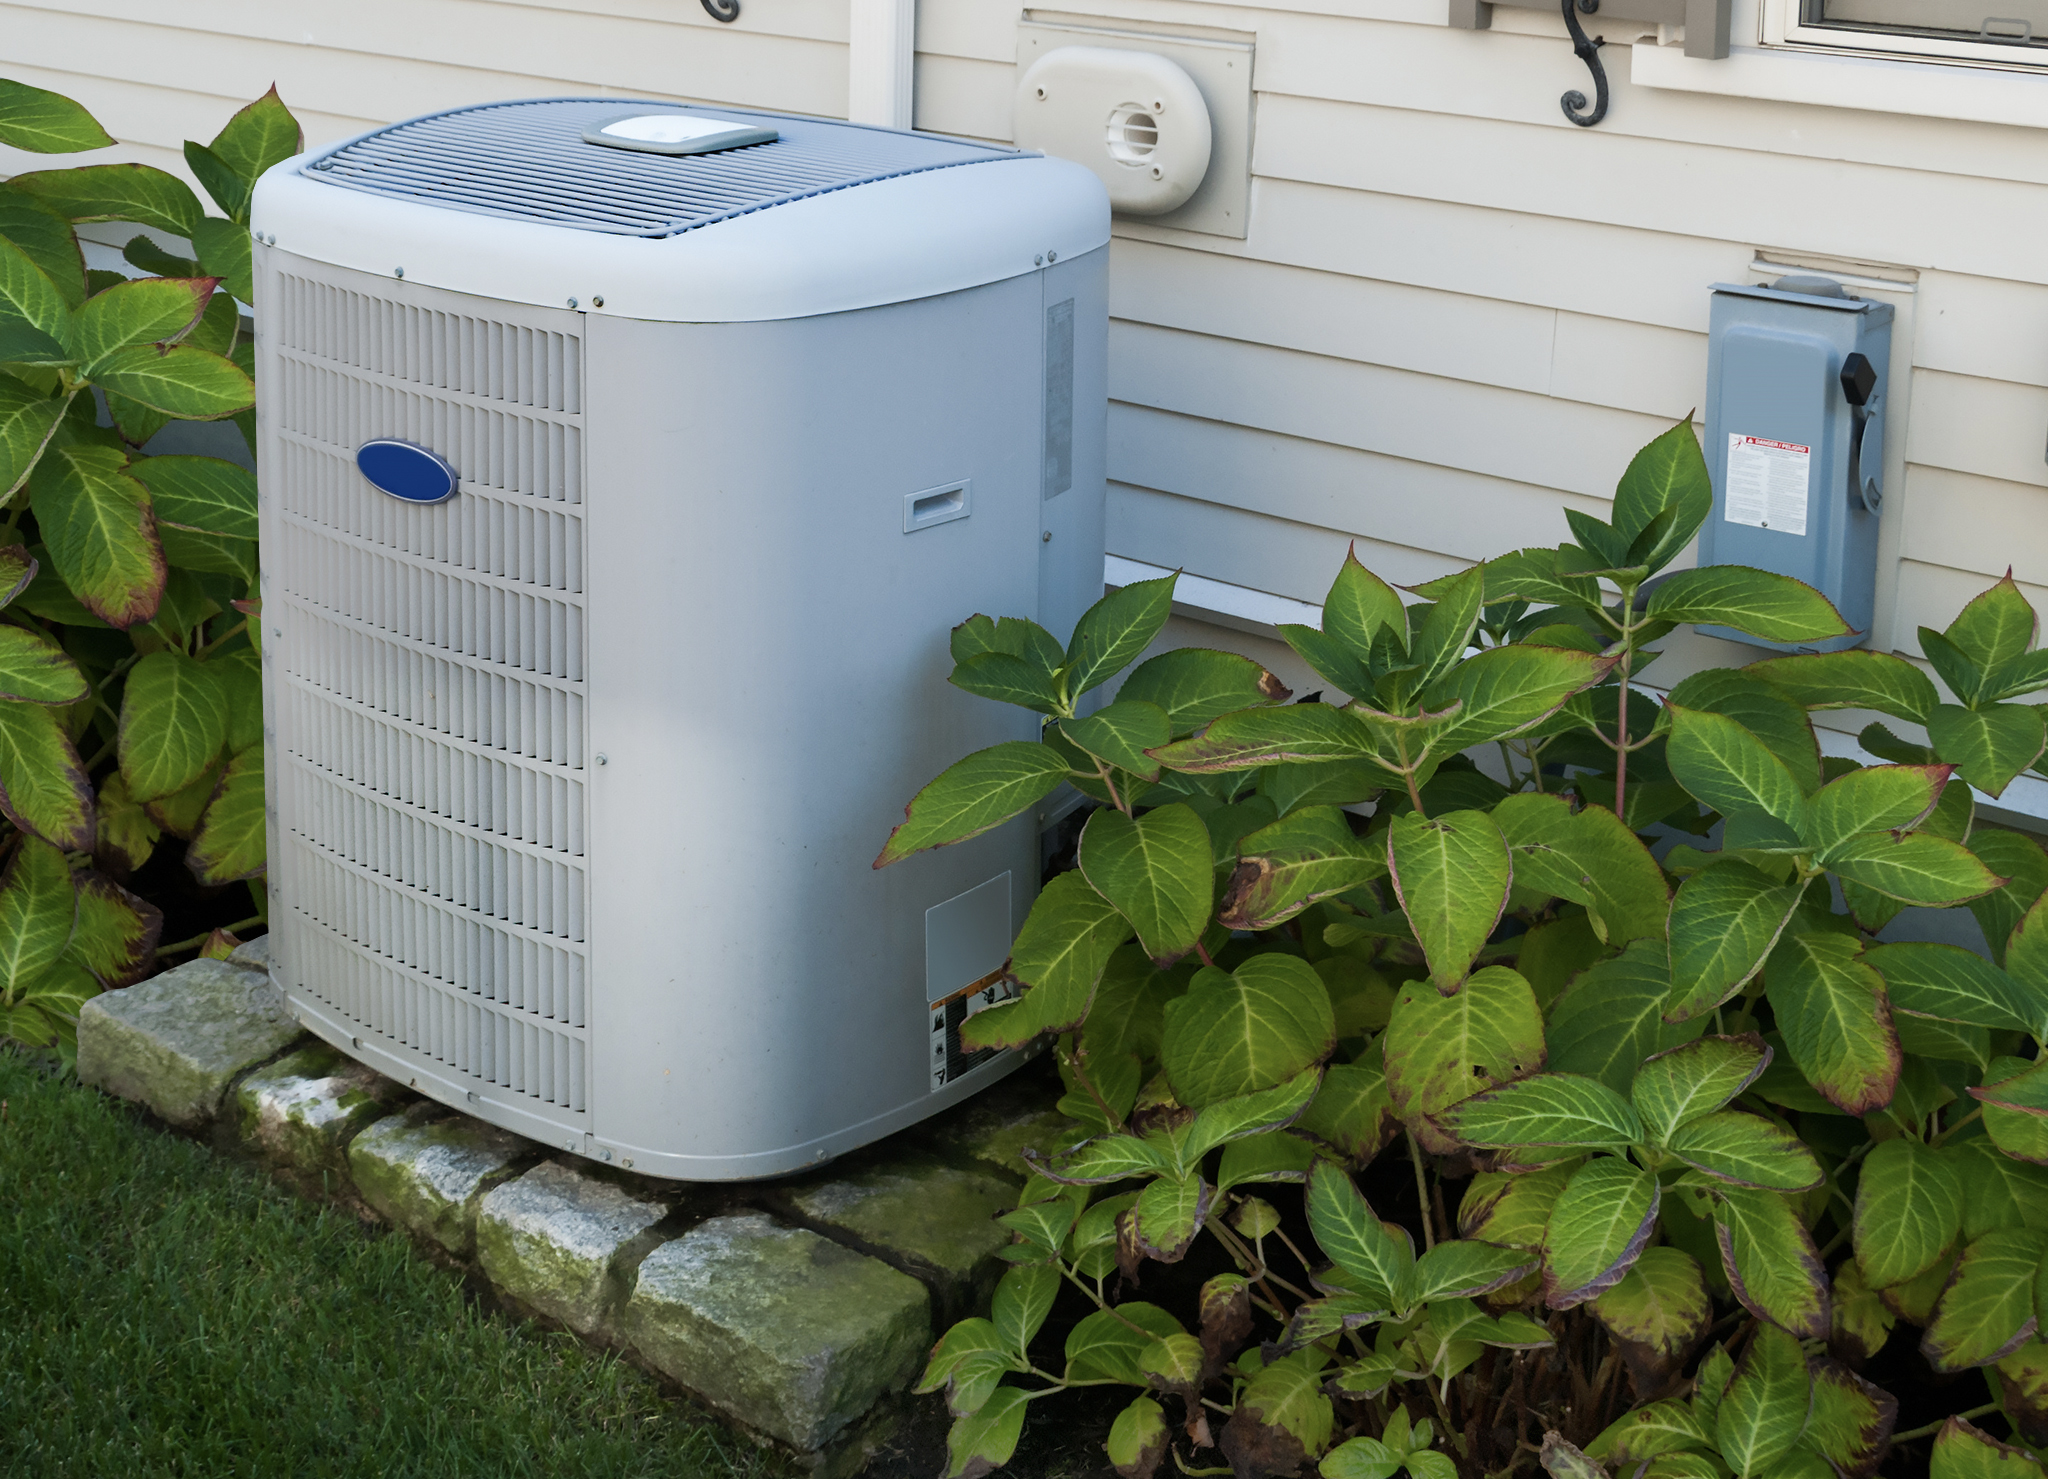 How can I landscape around my Air Conditioner?